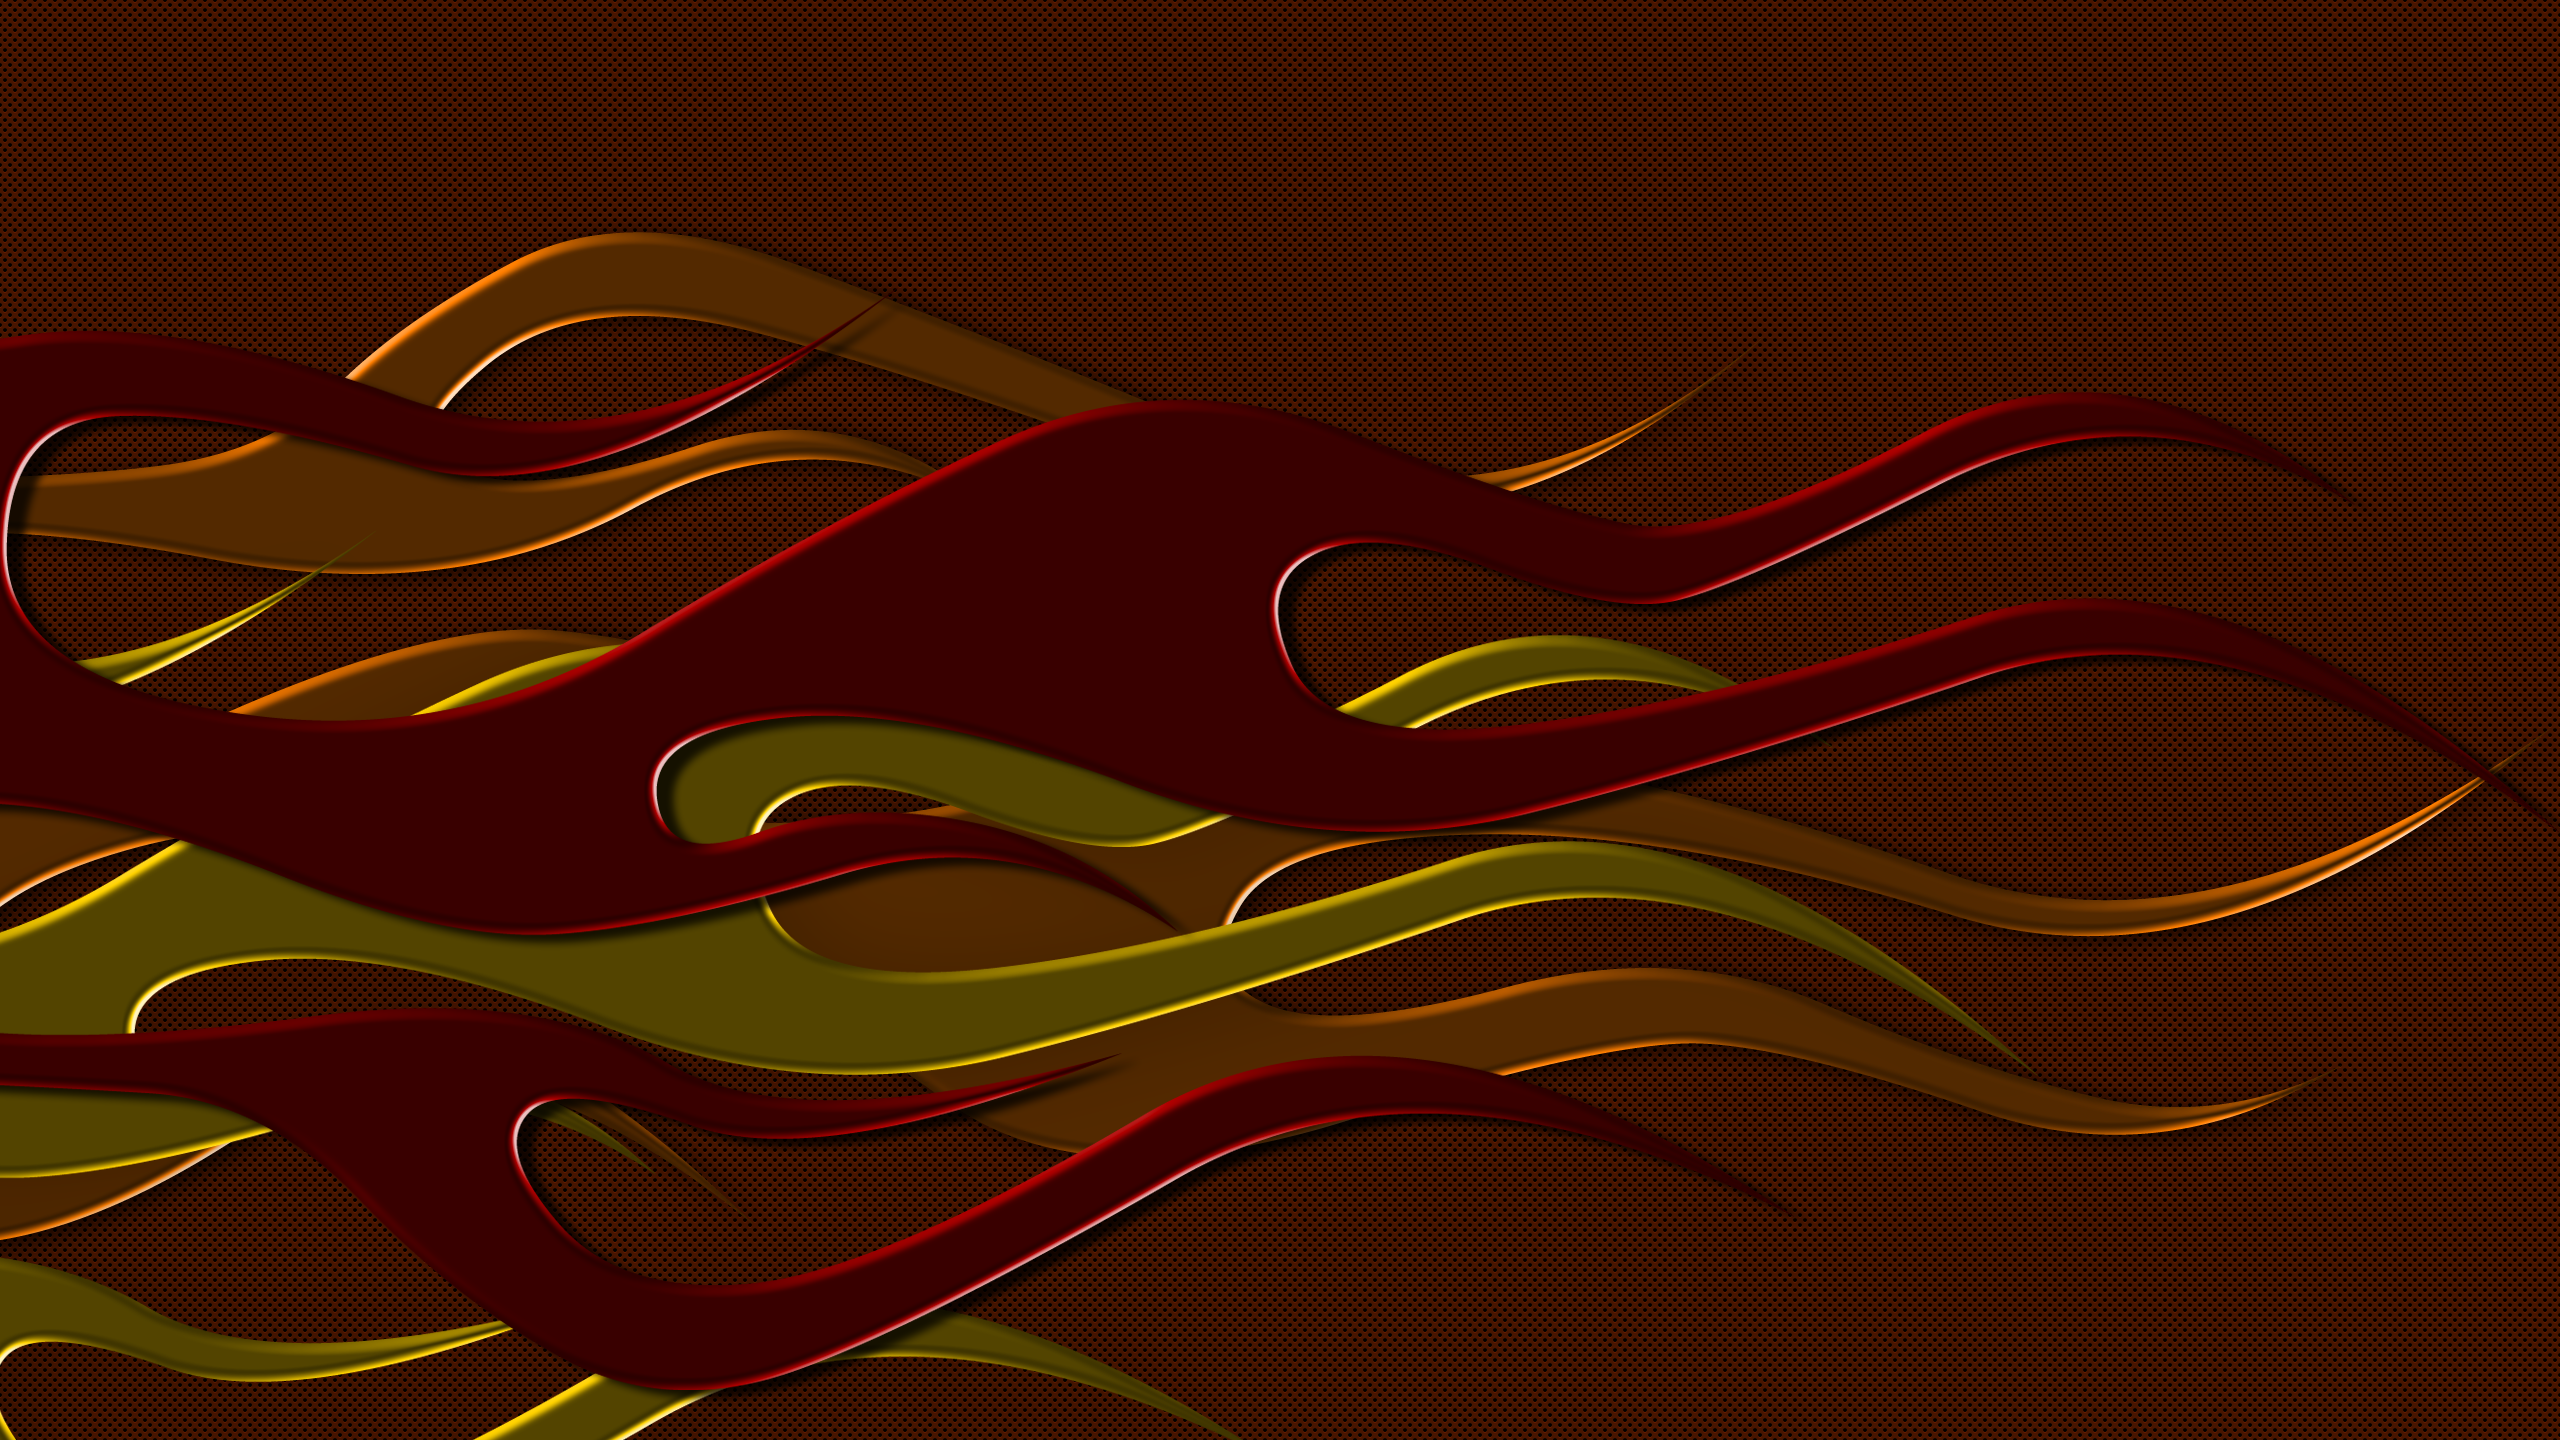 General 2560x1440 fire abstract shapes simple background digital art DeviantArt red background